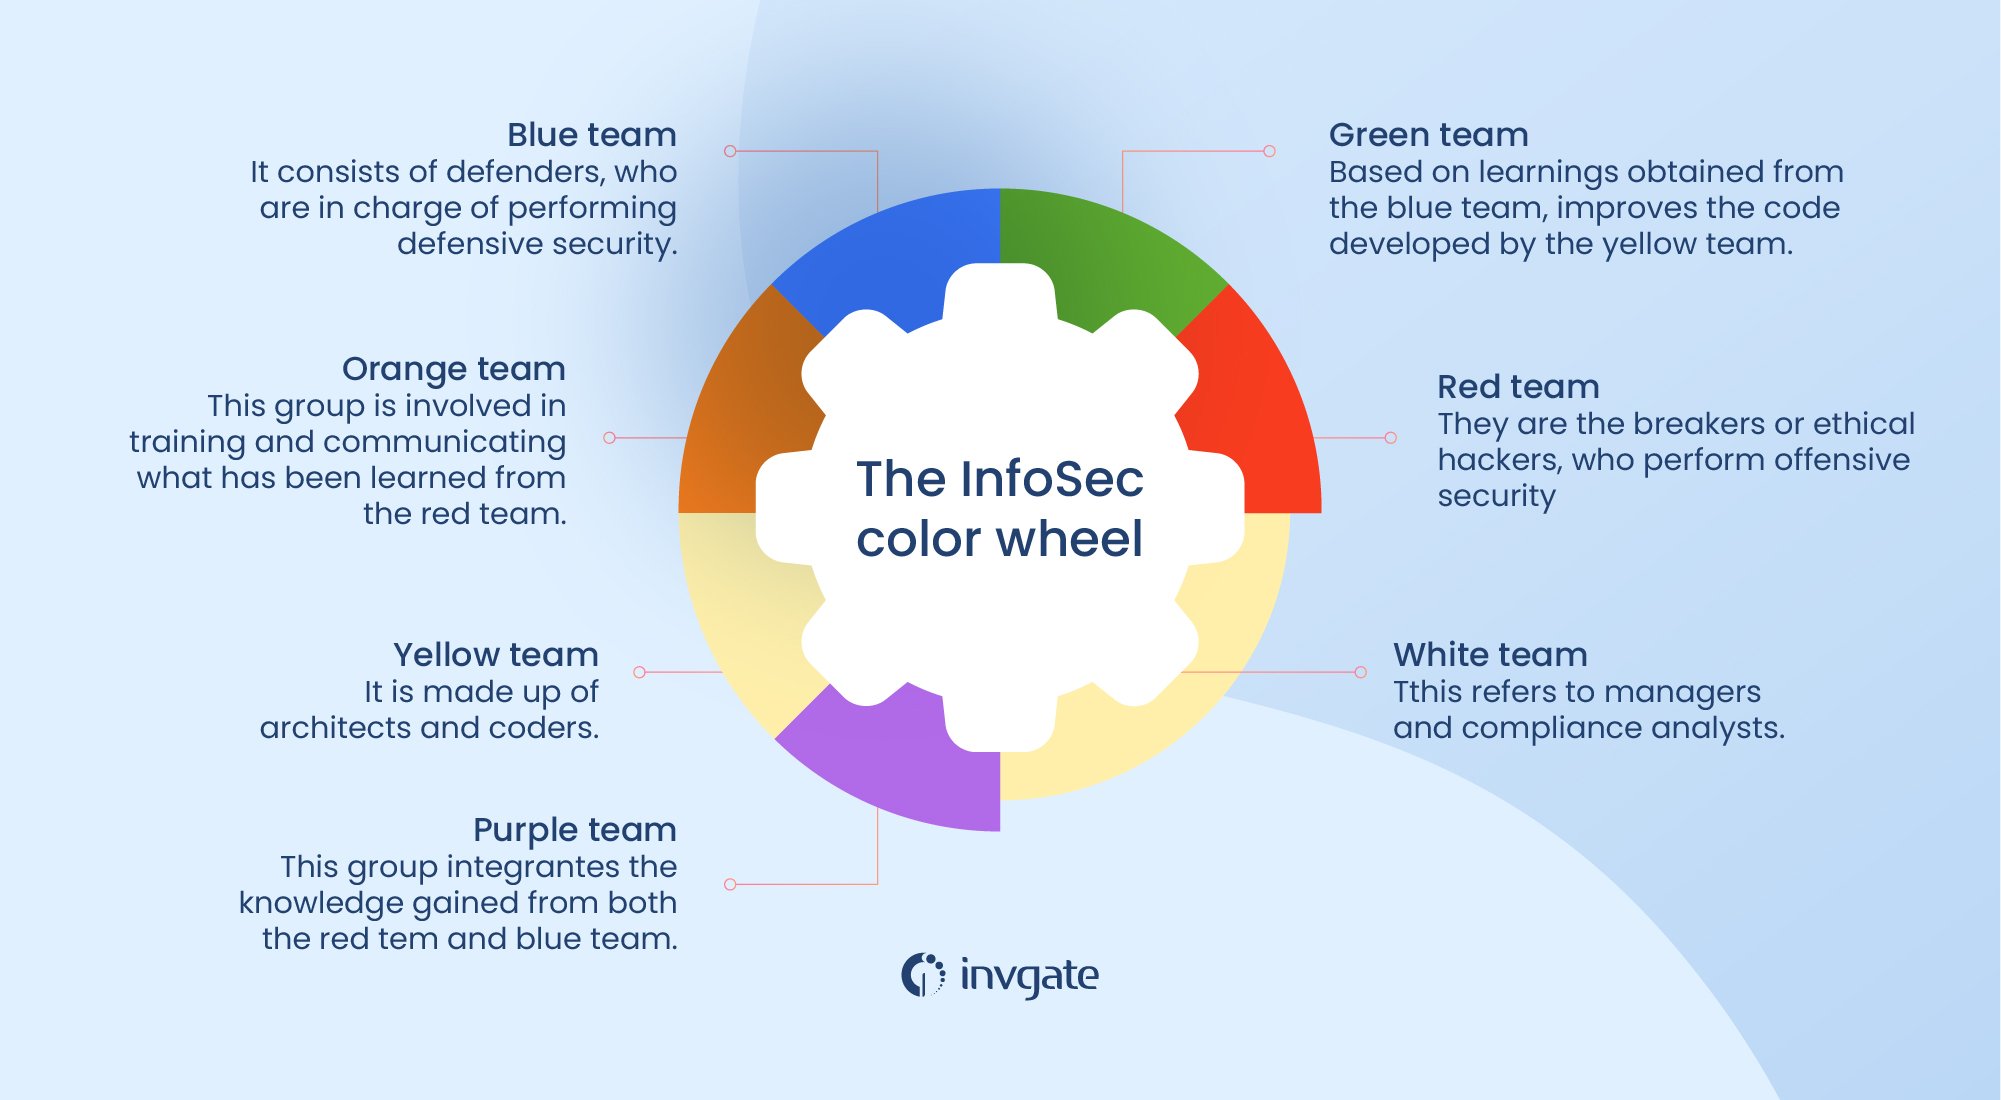 The InfoSec color wheel assigns different colors to the various roles performed within the organization regarding security.